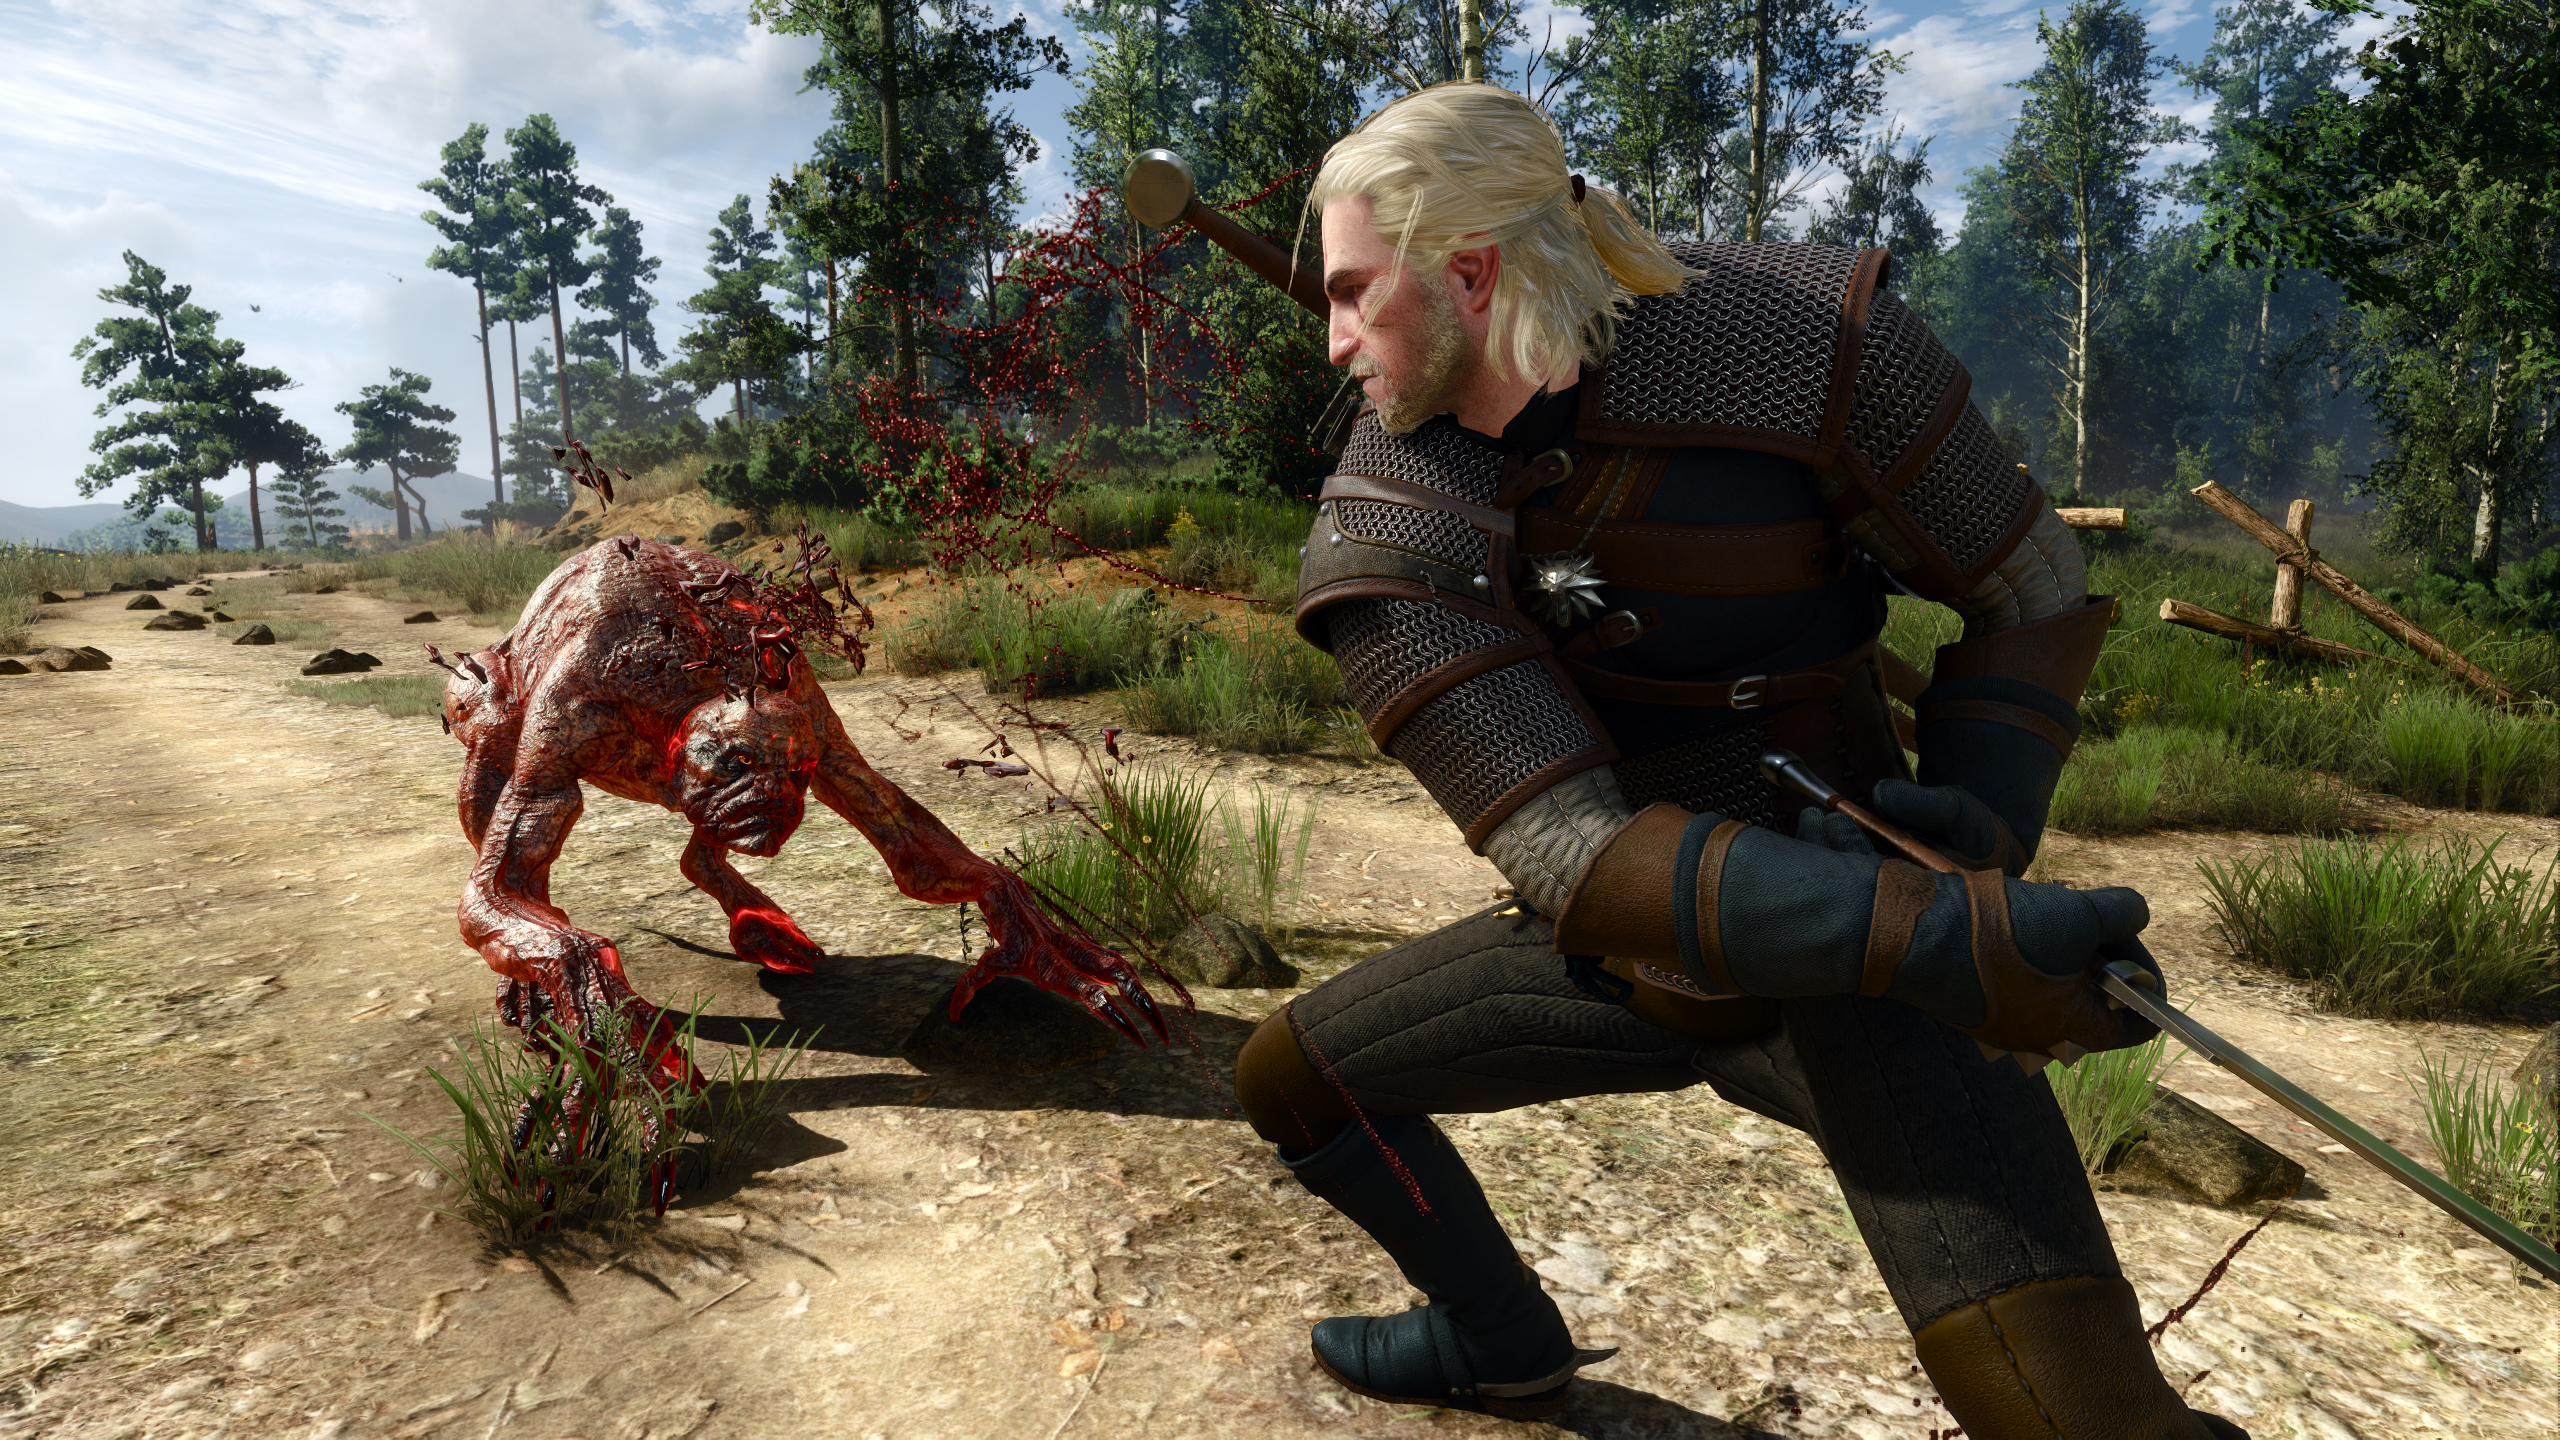 Geralt fights a ghoul in The Witcher 3: Wild Hunt, with ray tracing enabled via the Next Gen update.